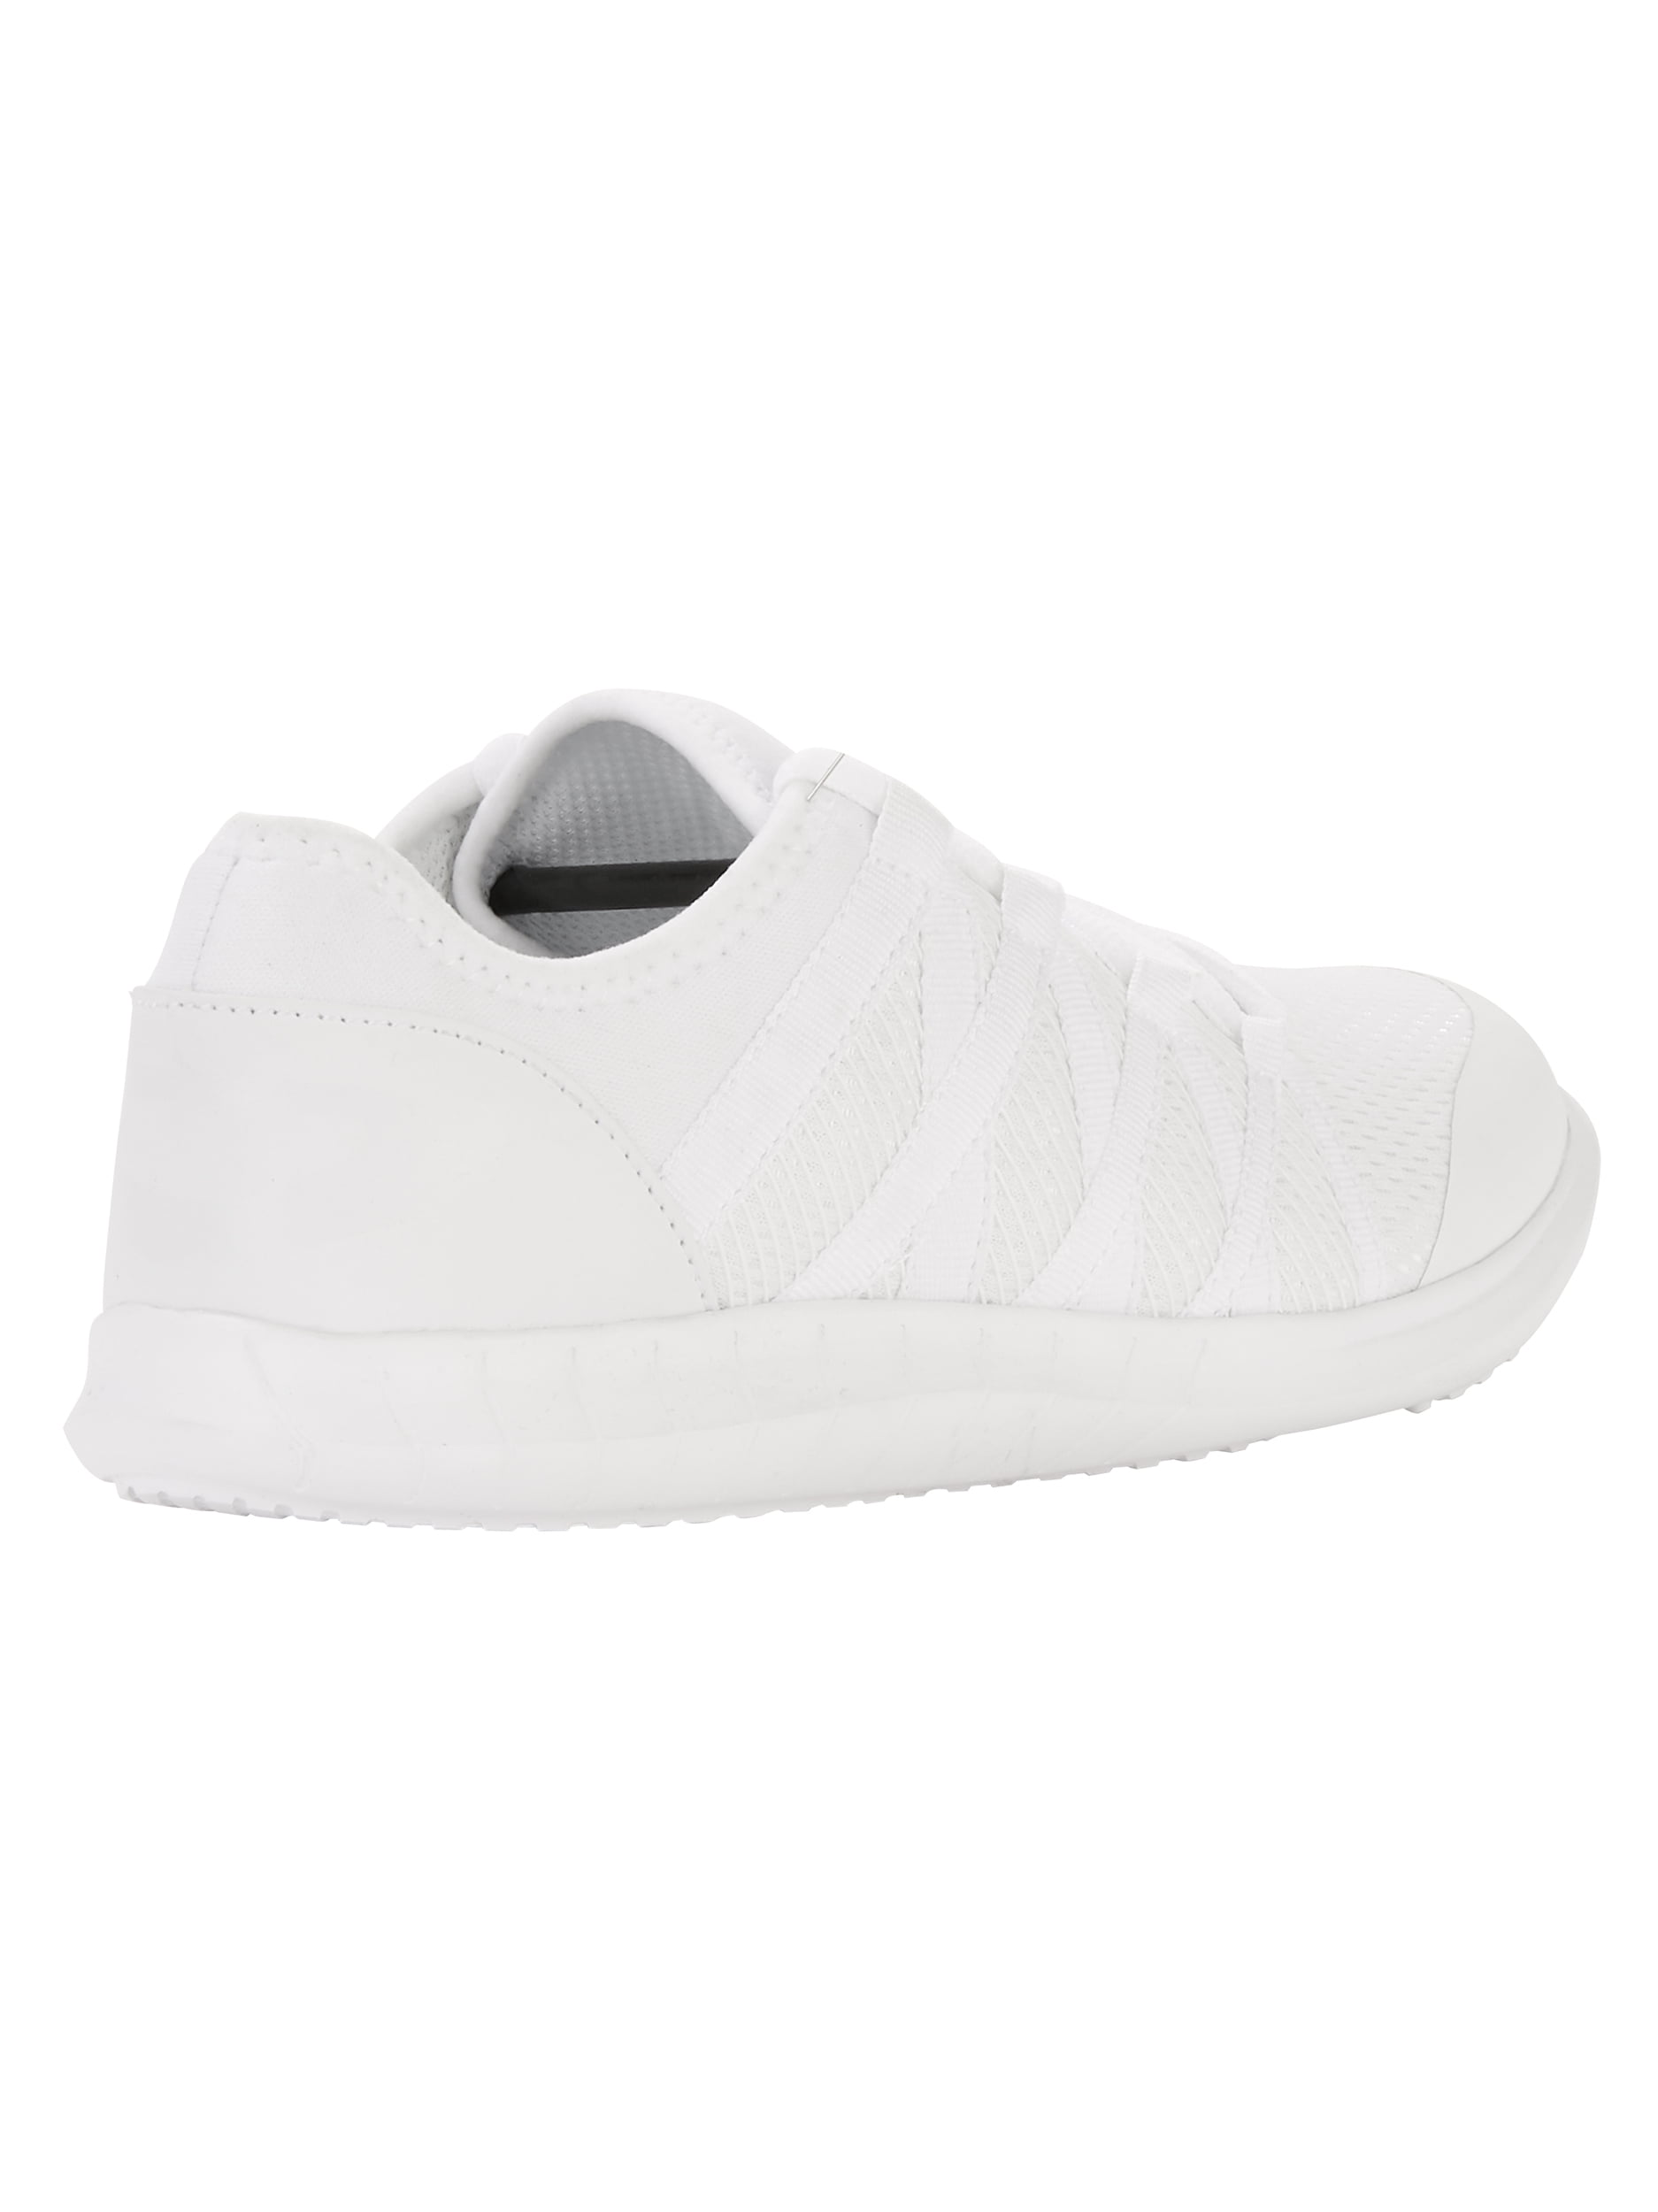 Compare prices for Zig Zag Sneaker (1A5HGE) in official stores